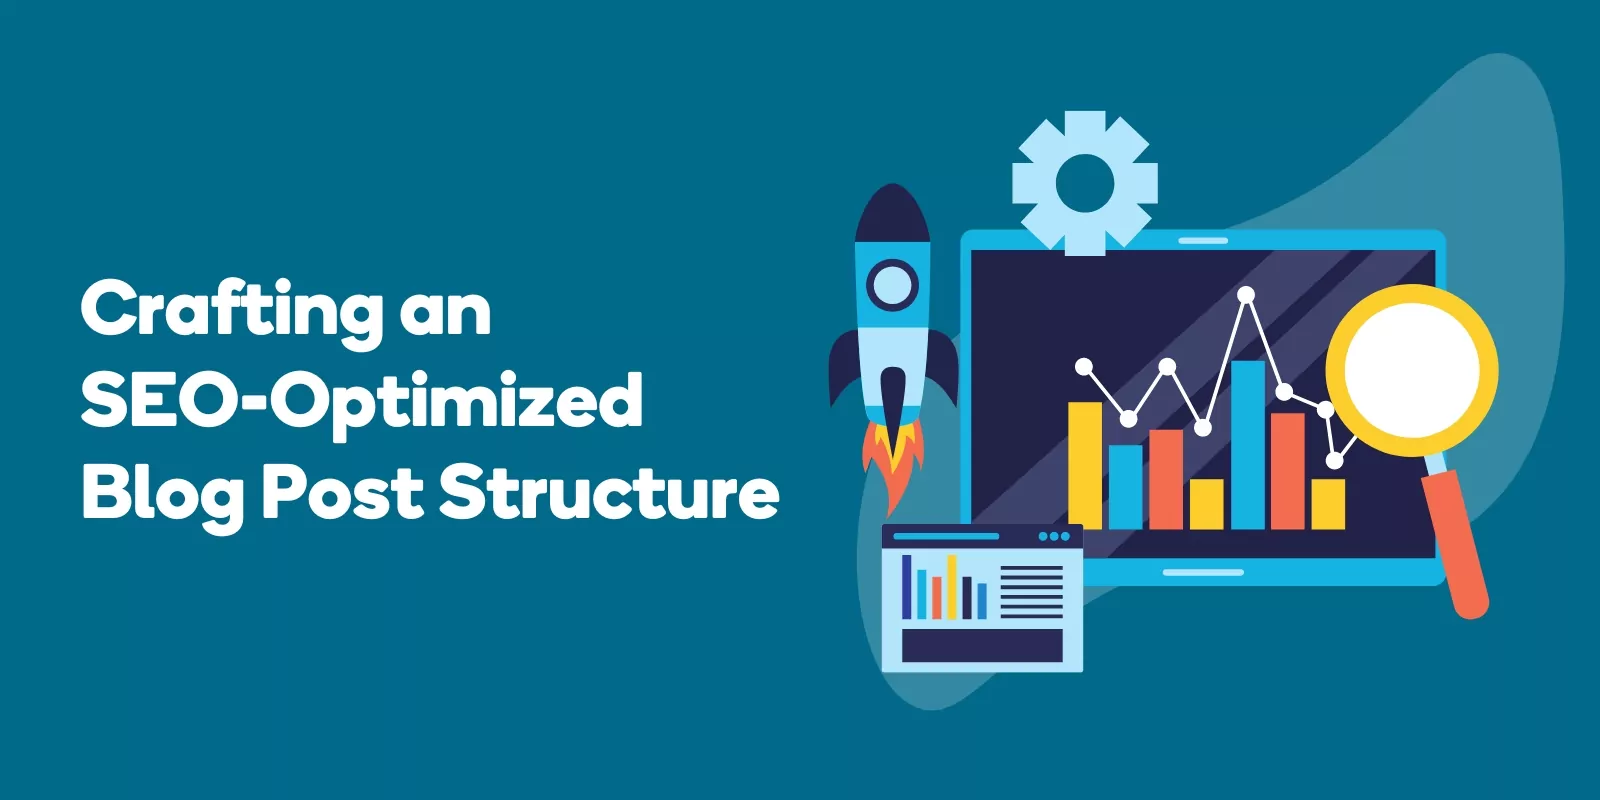 Crafting an SEO-Optimized Blog Post Structure